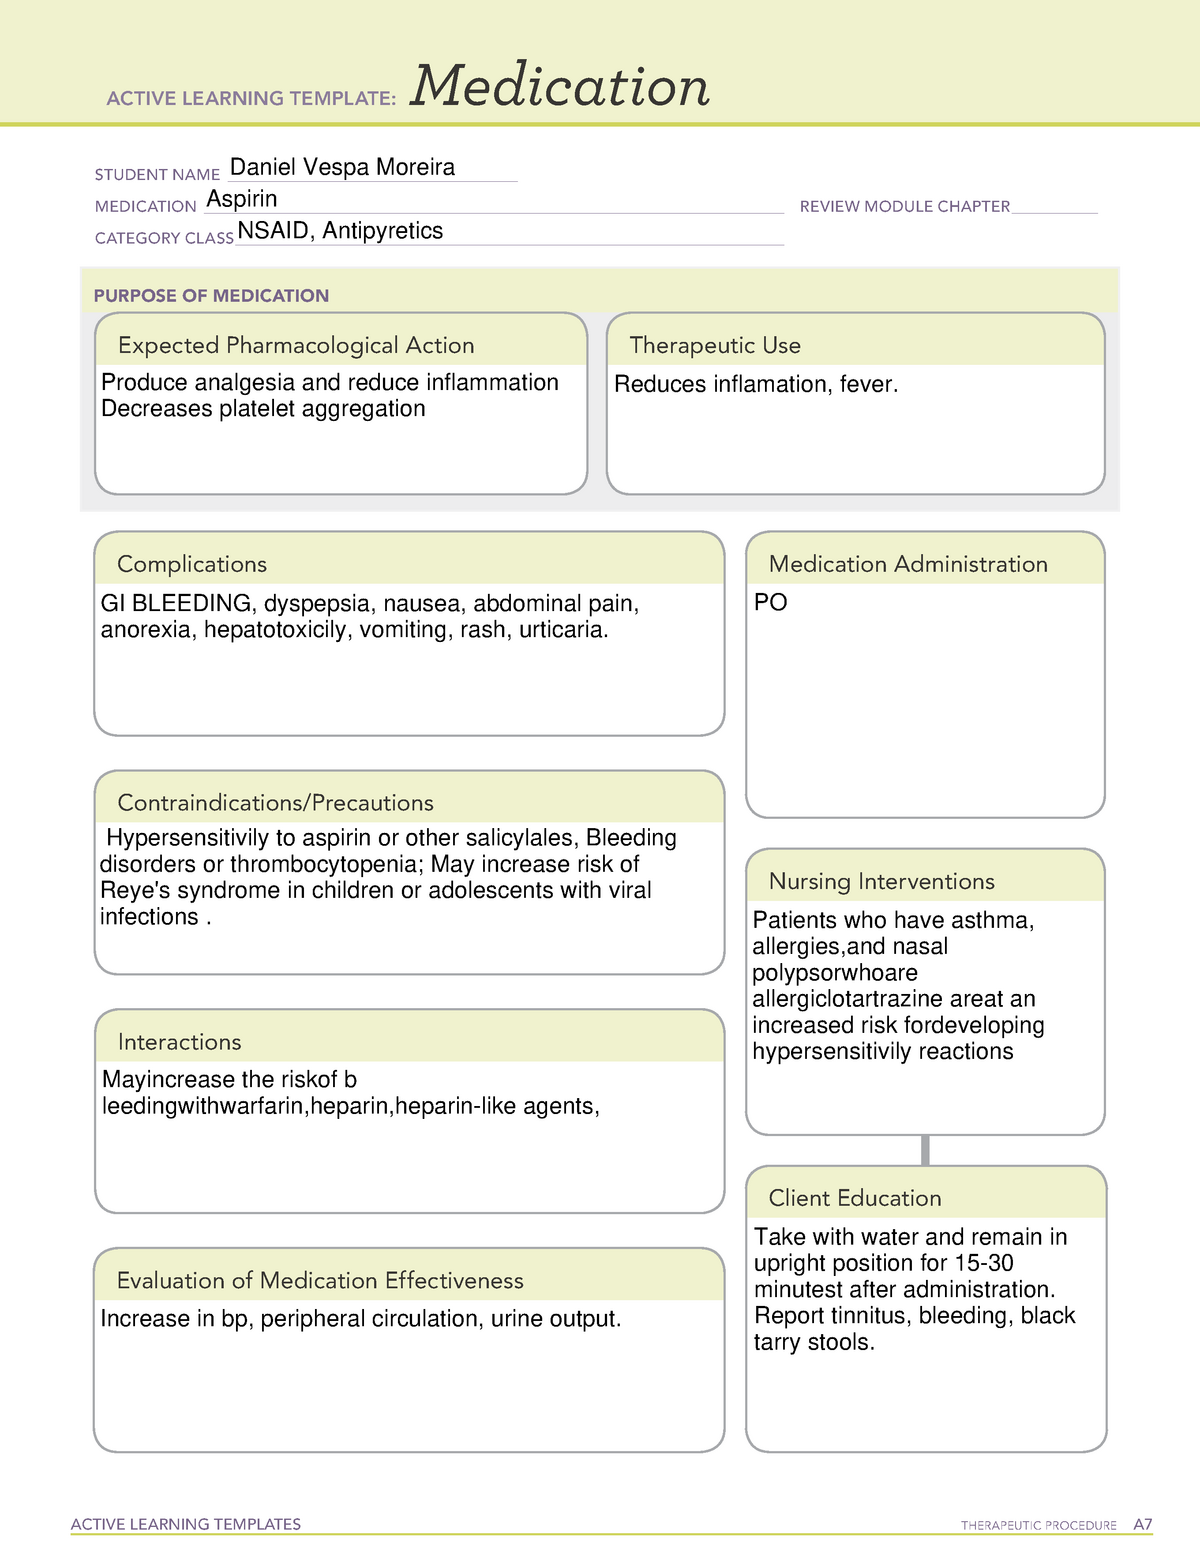 aspirin-active-learning-template-active-learning-templates-therapeutic-procedure-a-medication